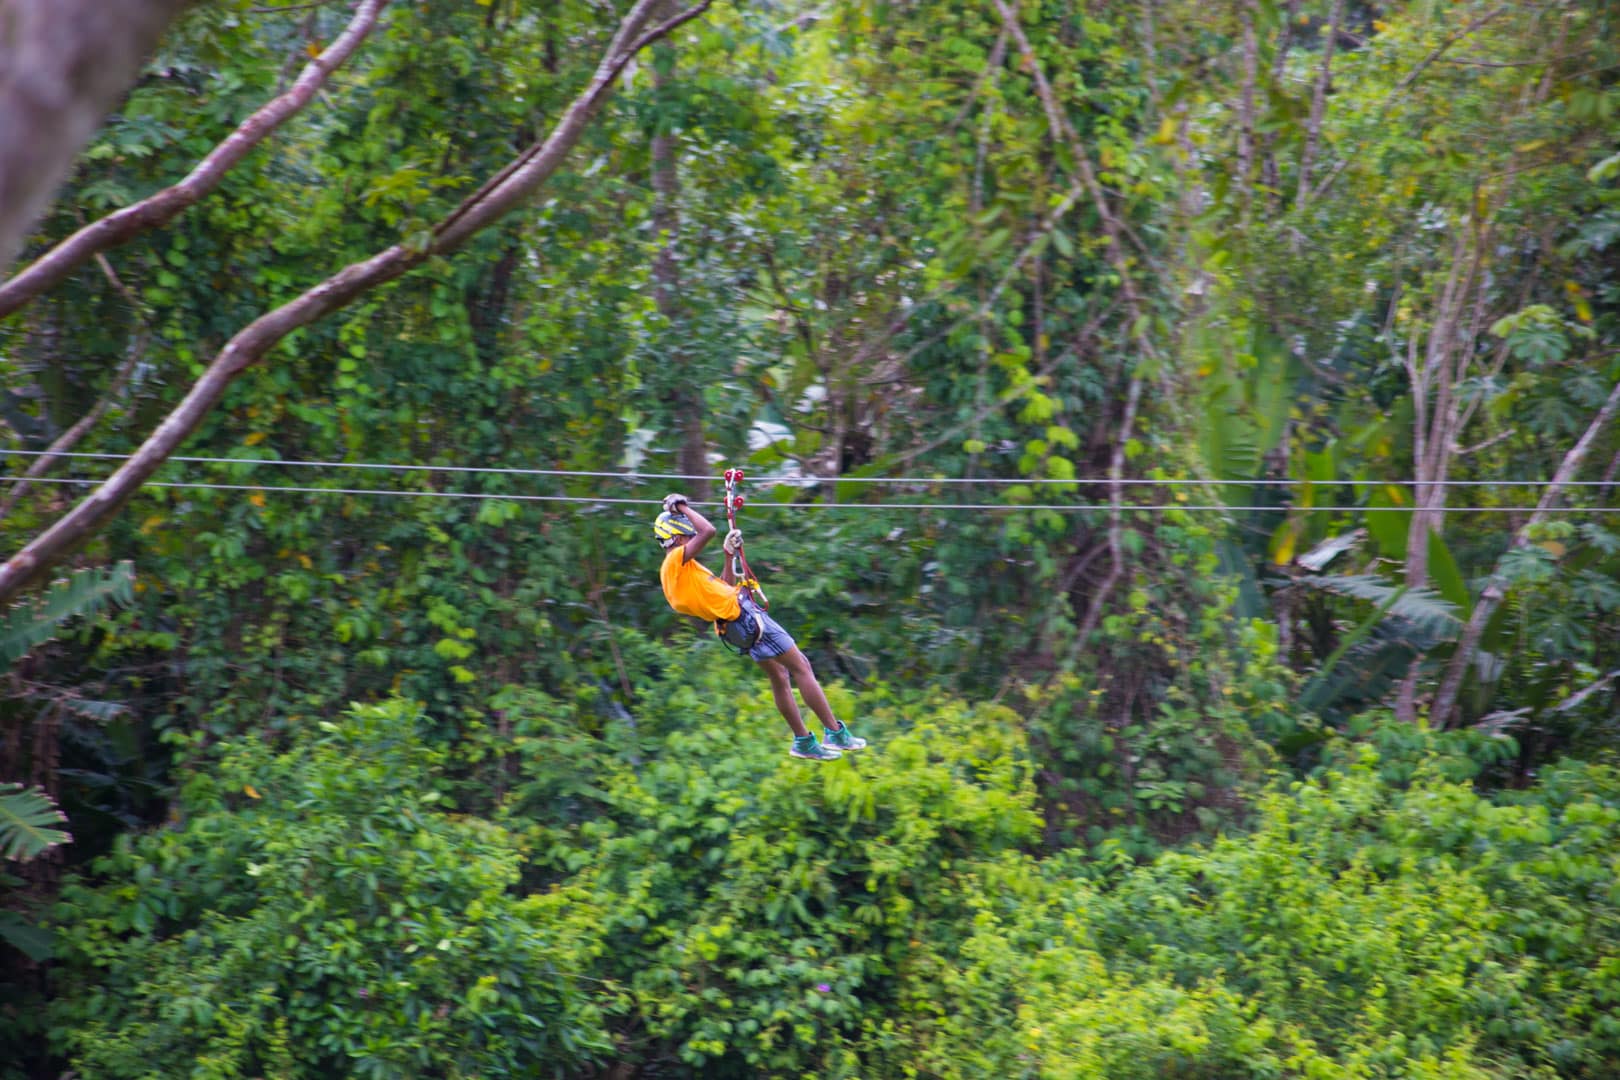 A guest gliding through the jungle canopy during the Angel Falls Extreme Zipline at The Rainforest Lodge at Sleeping Giant Resort